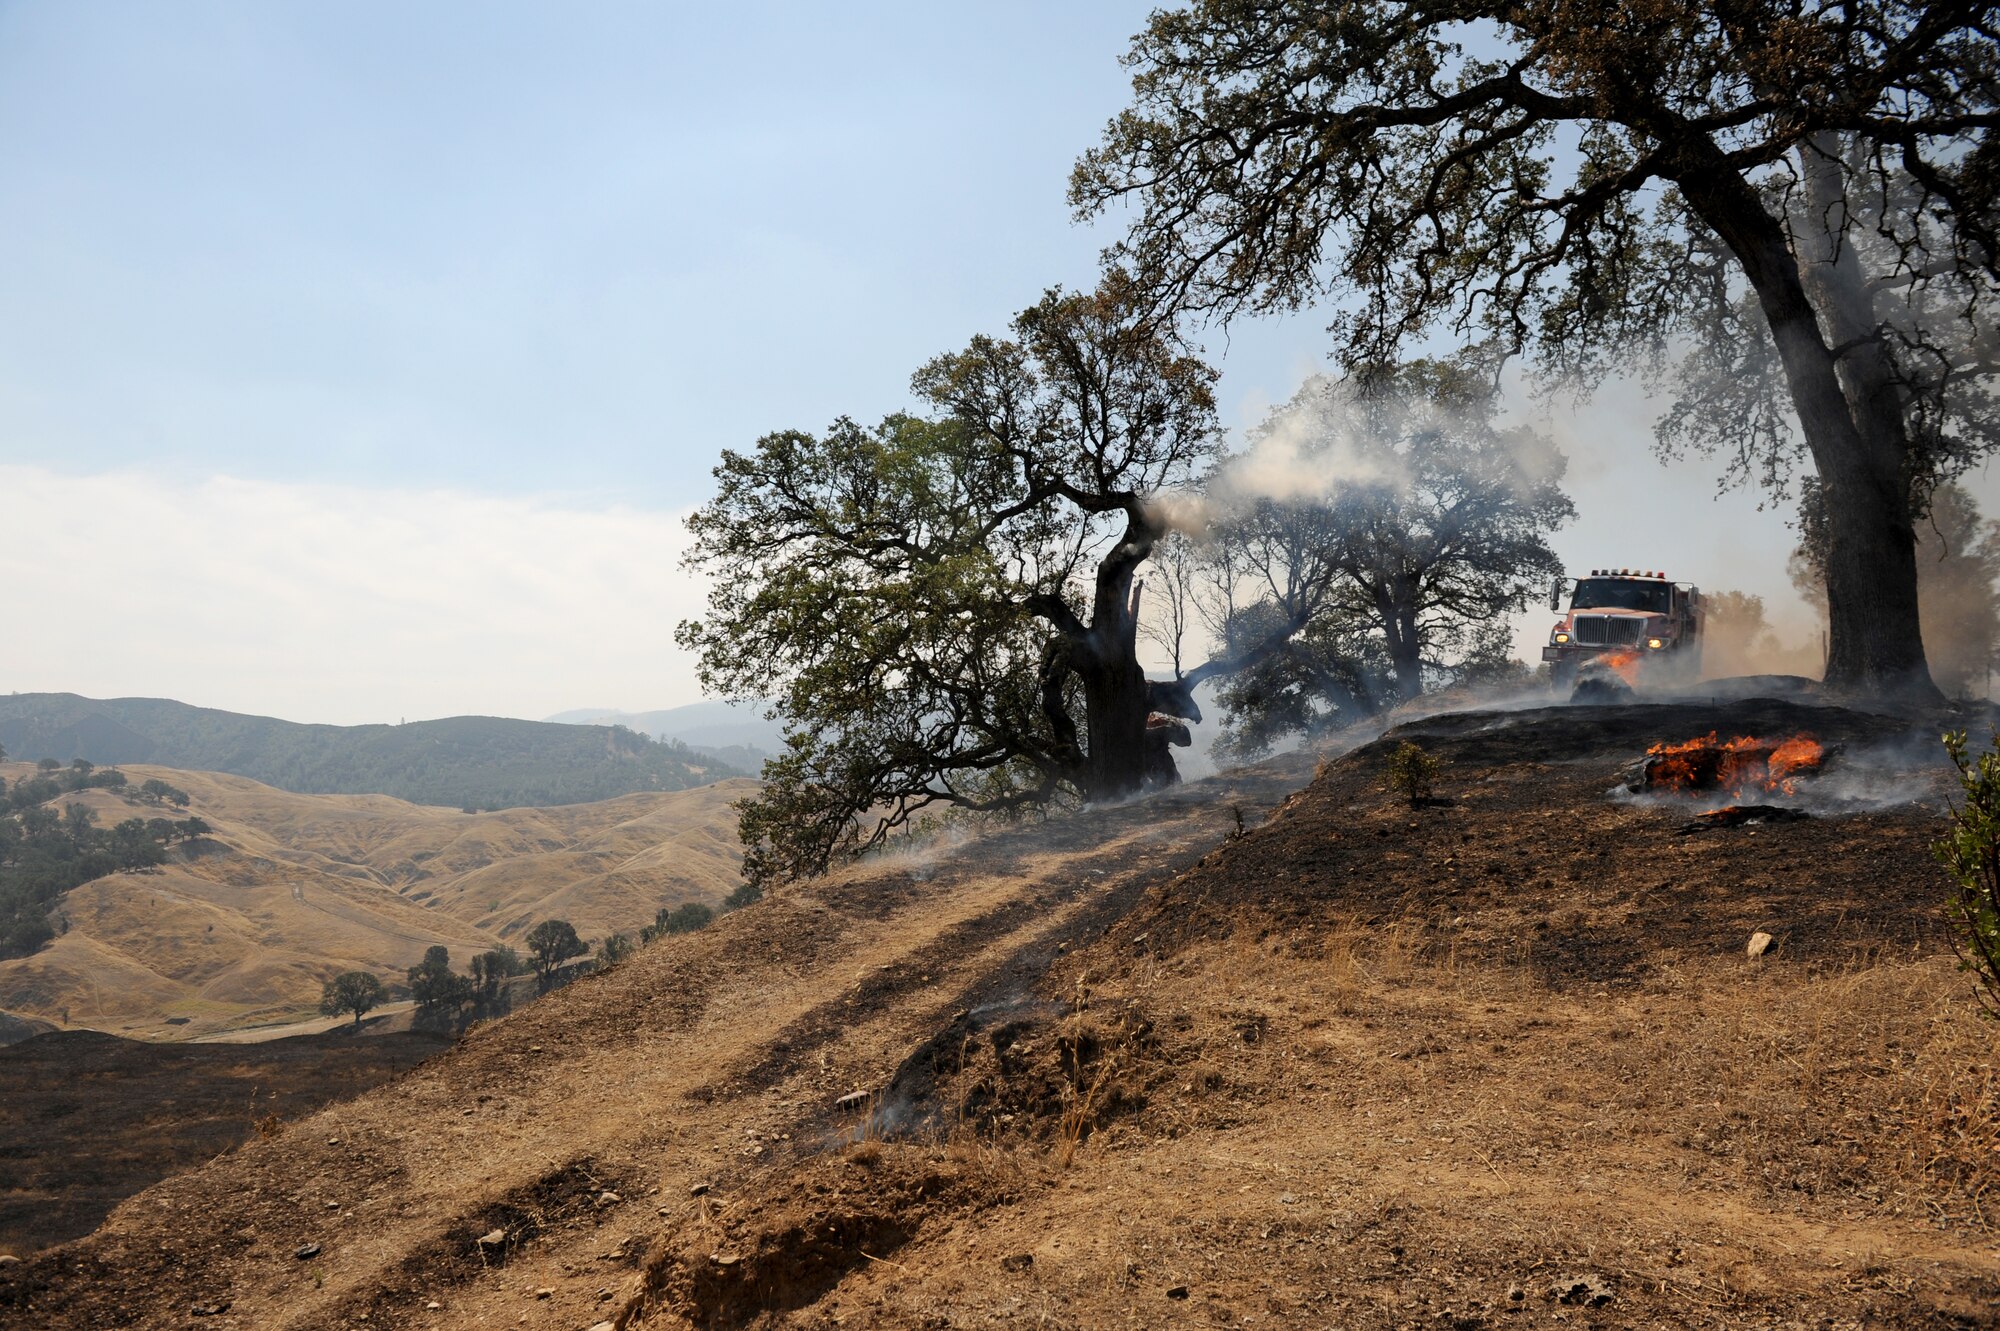 A fire engine operator drives up a road behind a burning fire, Aug. 6, 2015, near Clearlake, California. The Rocky Wildfire has consumed nearly 70,000 acres in Northern California. (U.S. Air Force Photo by Airman Preston L. Cherry)